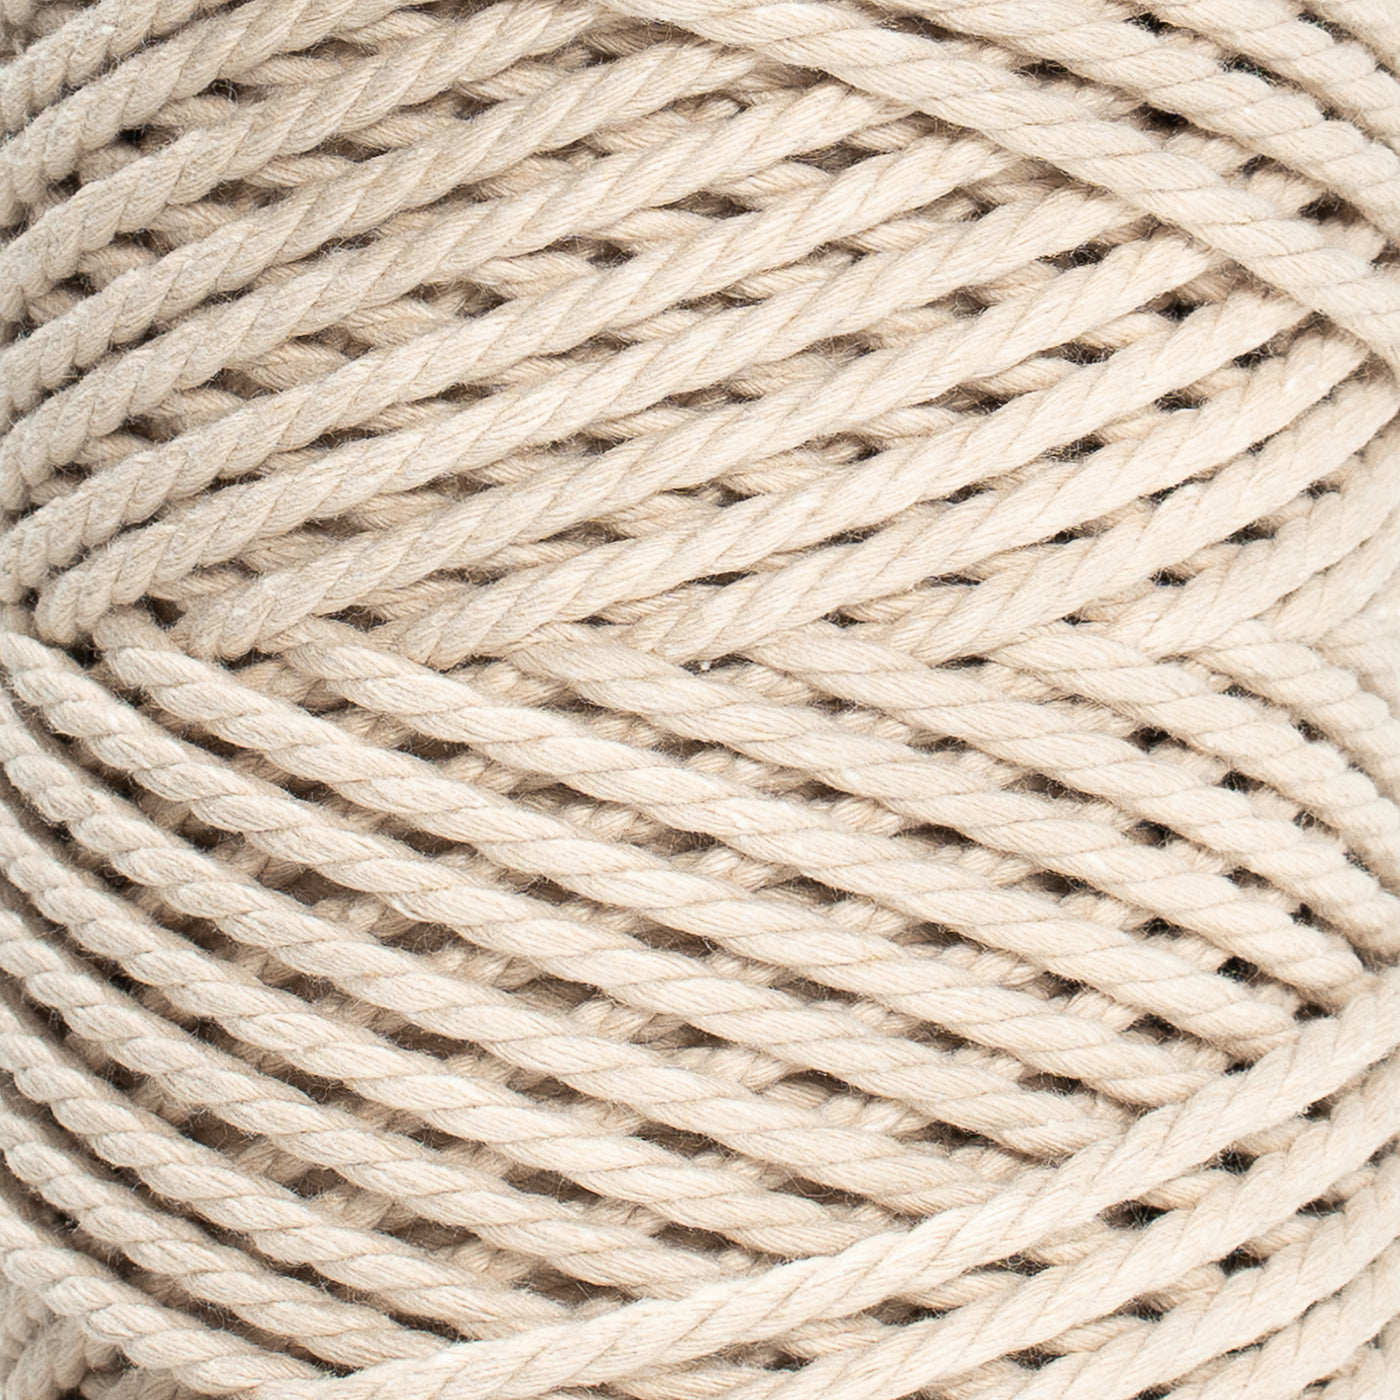 COTTON ROPE ZERO WASTE 3 MM - 3 PLY - ALMOND COLOR